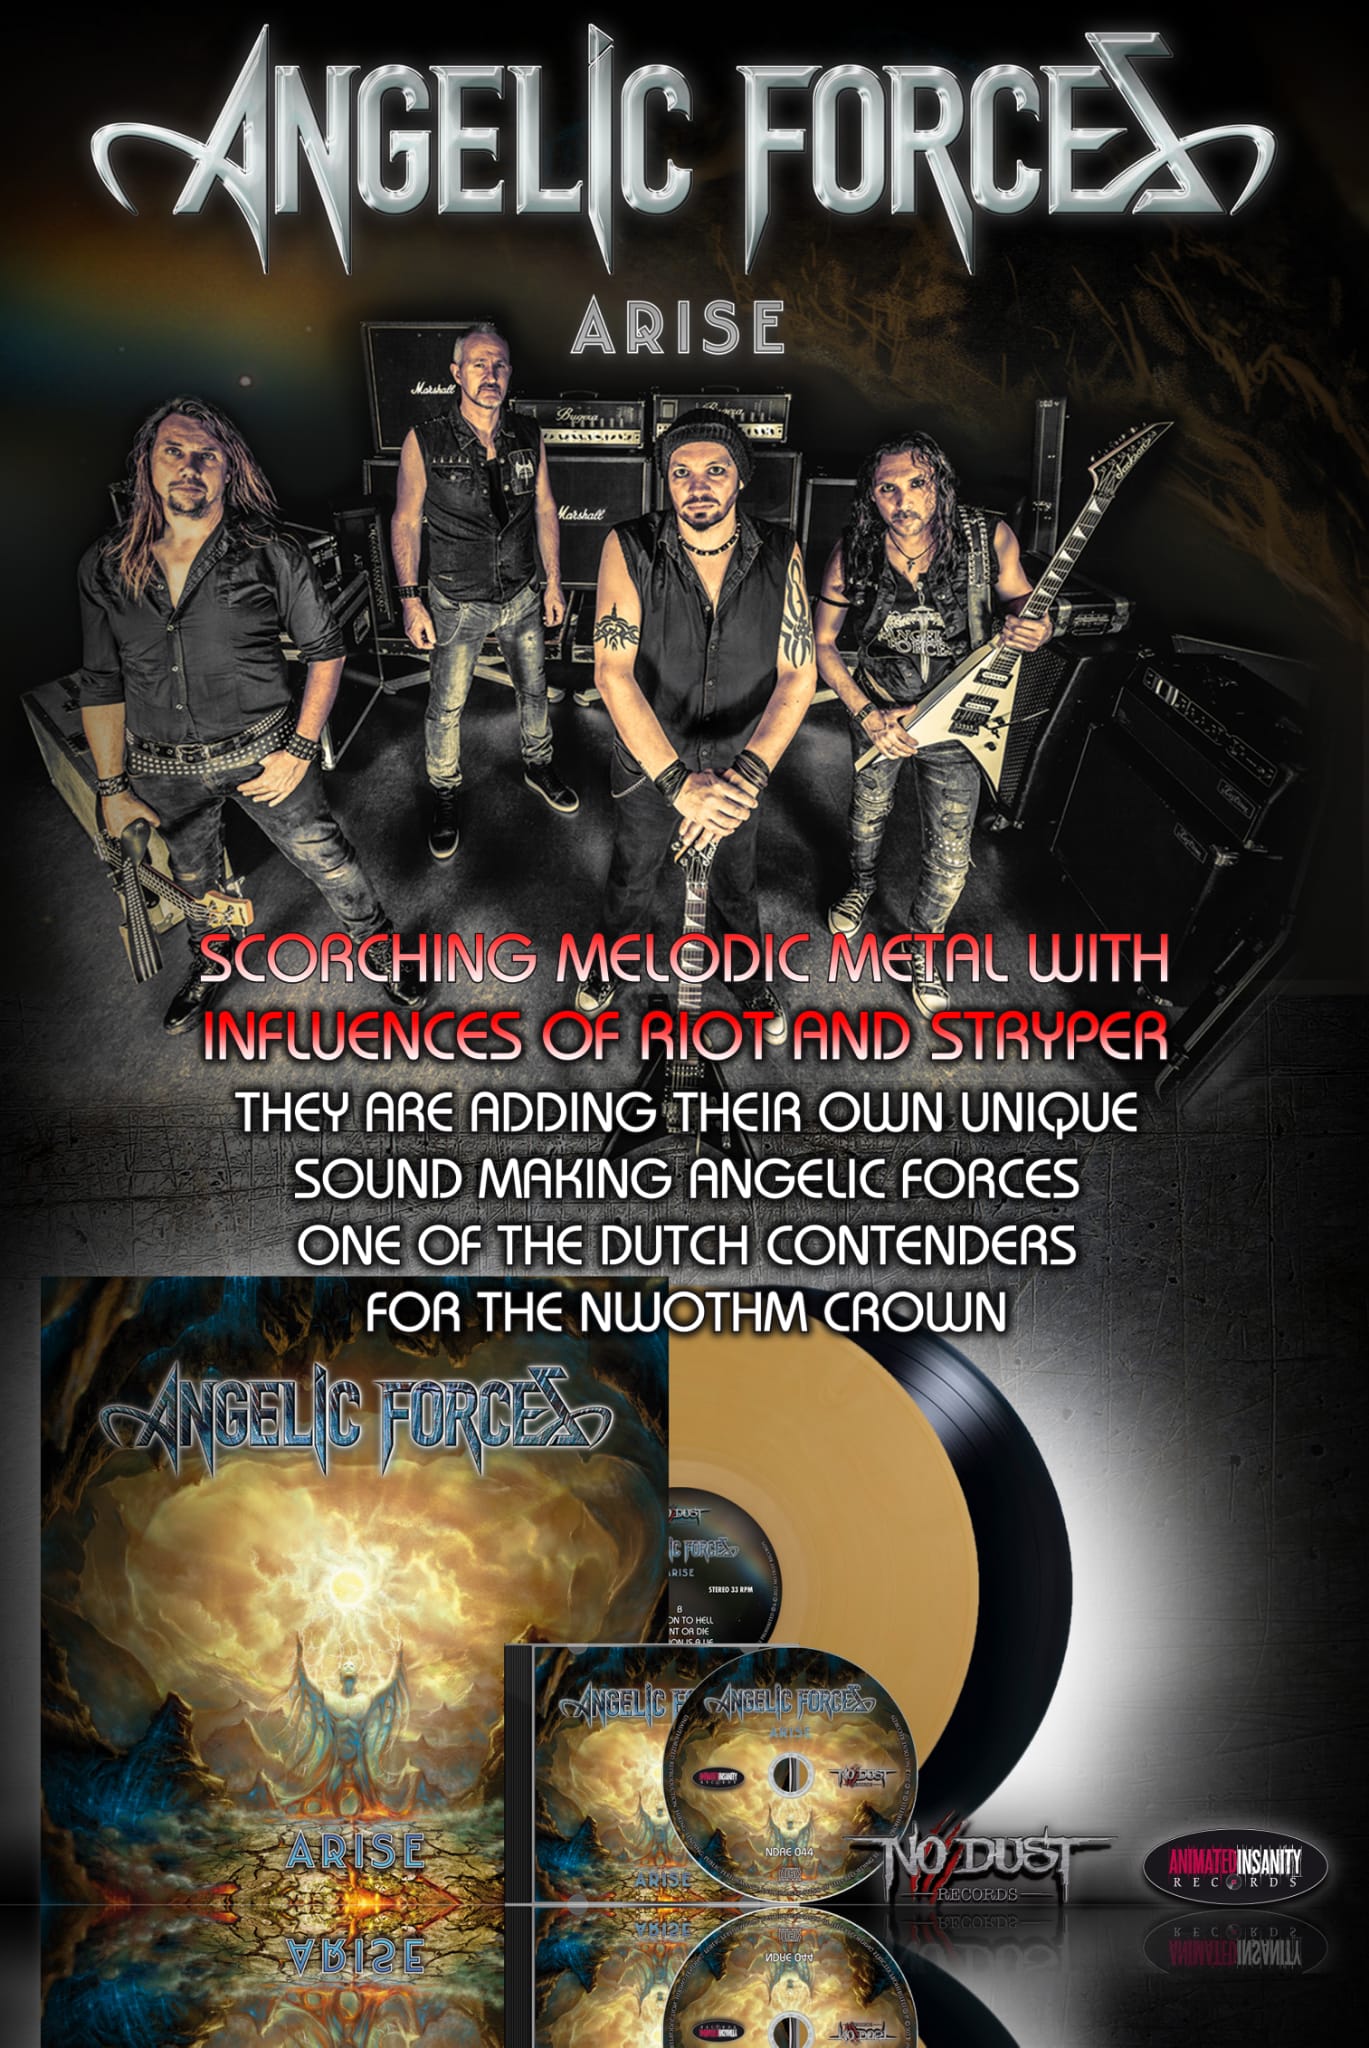 Angelic Forces - Arise album out now!

Scorching melodic metal with influences of Riot and Stryper